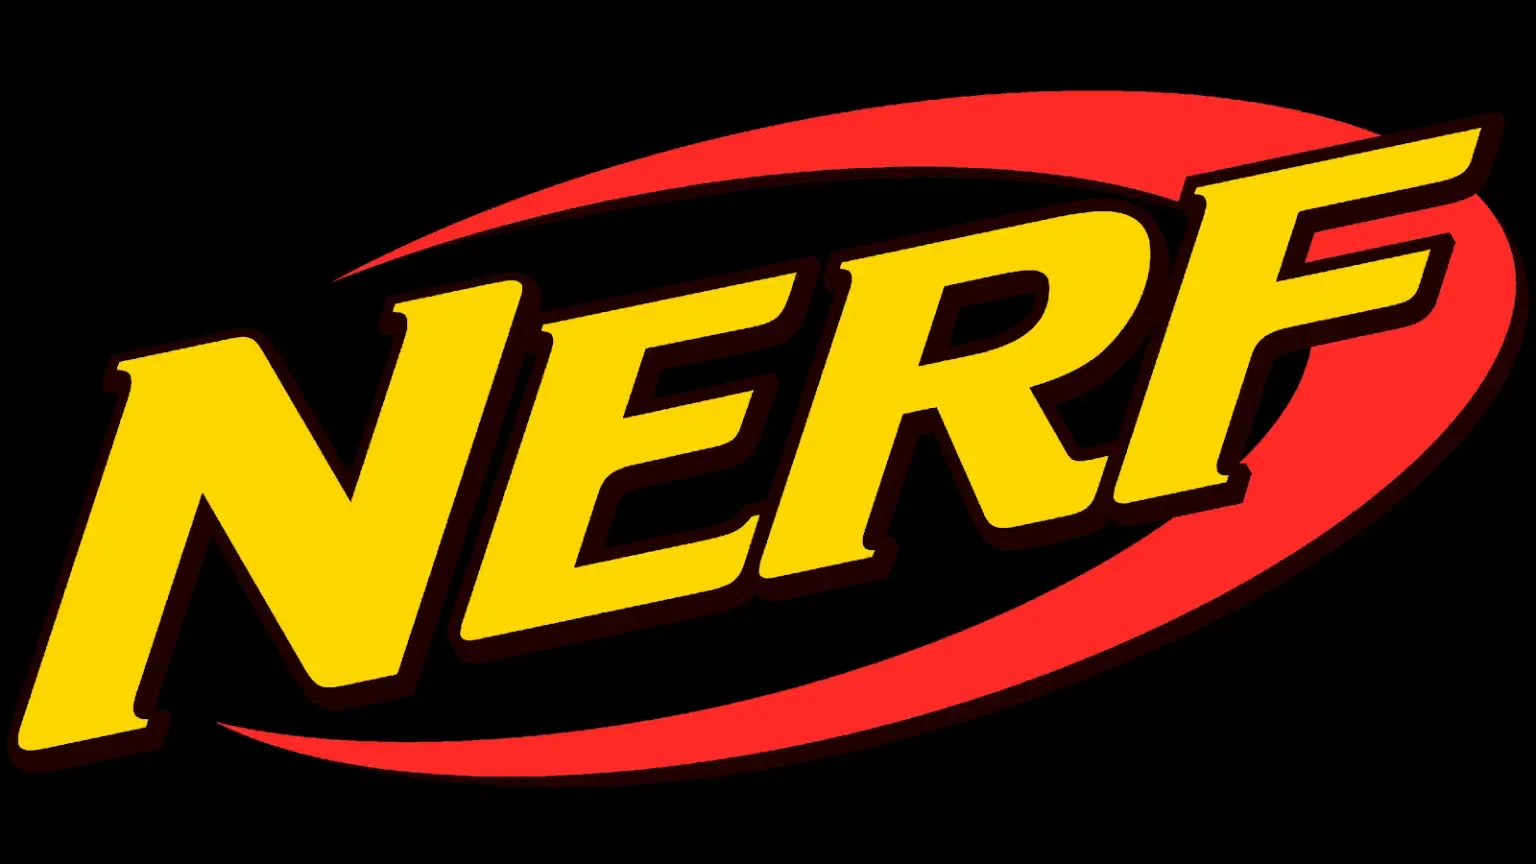 2005 – 2020: The Sixth Version Of The Nerf Logo